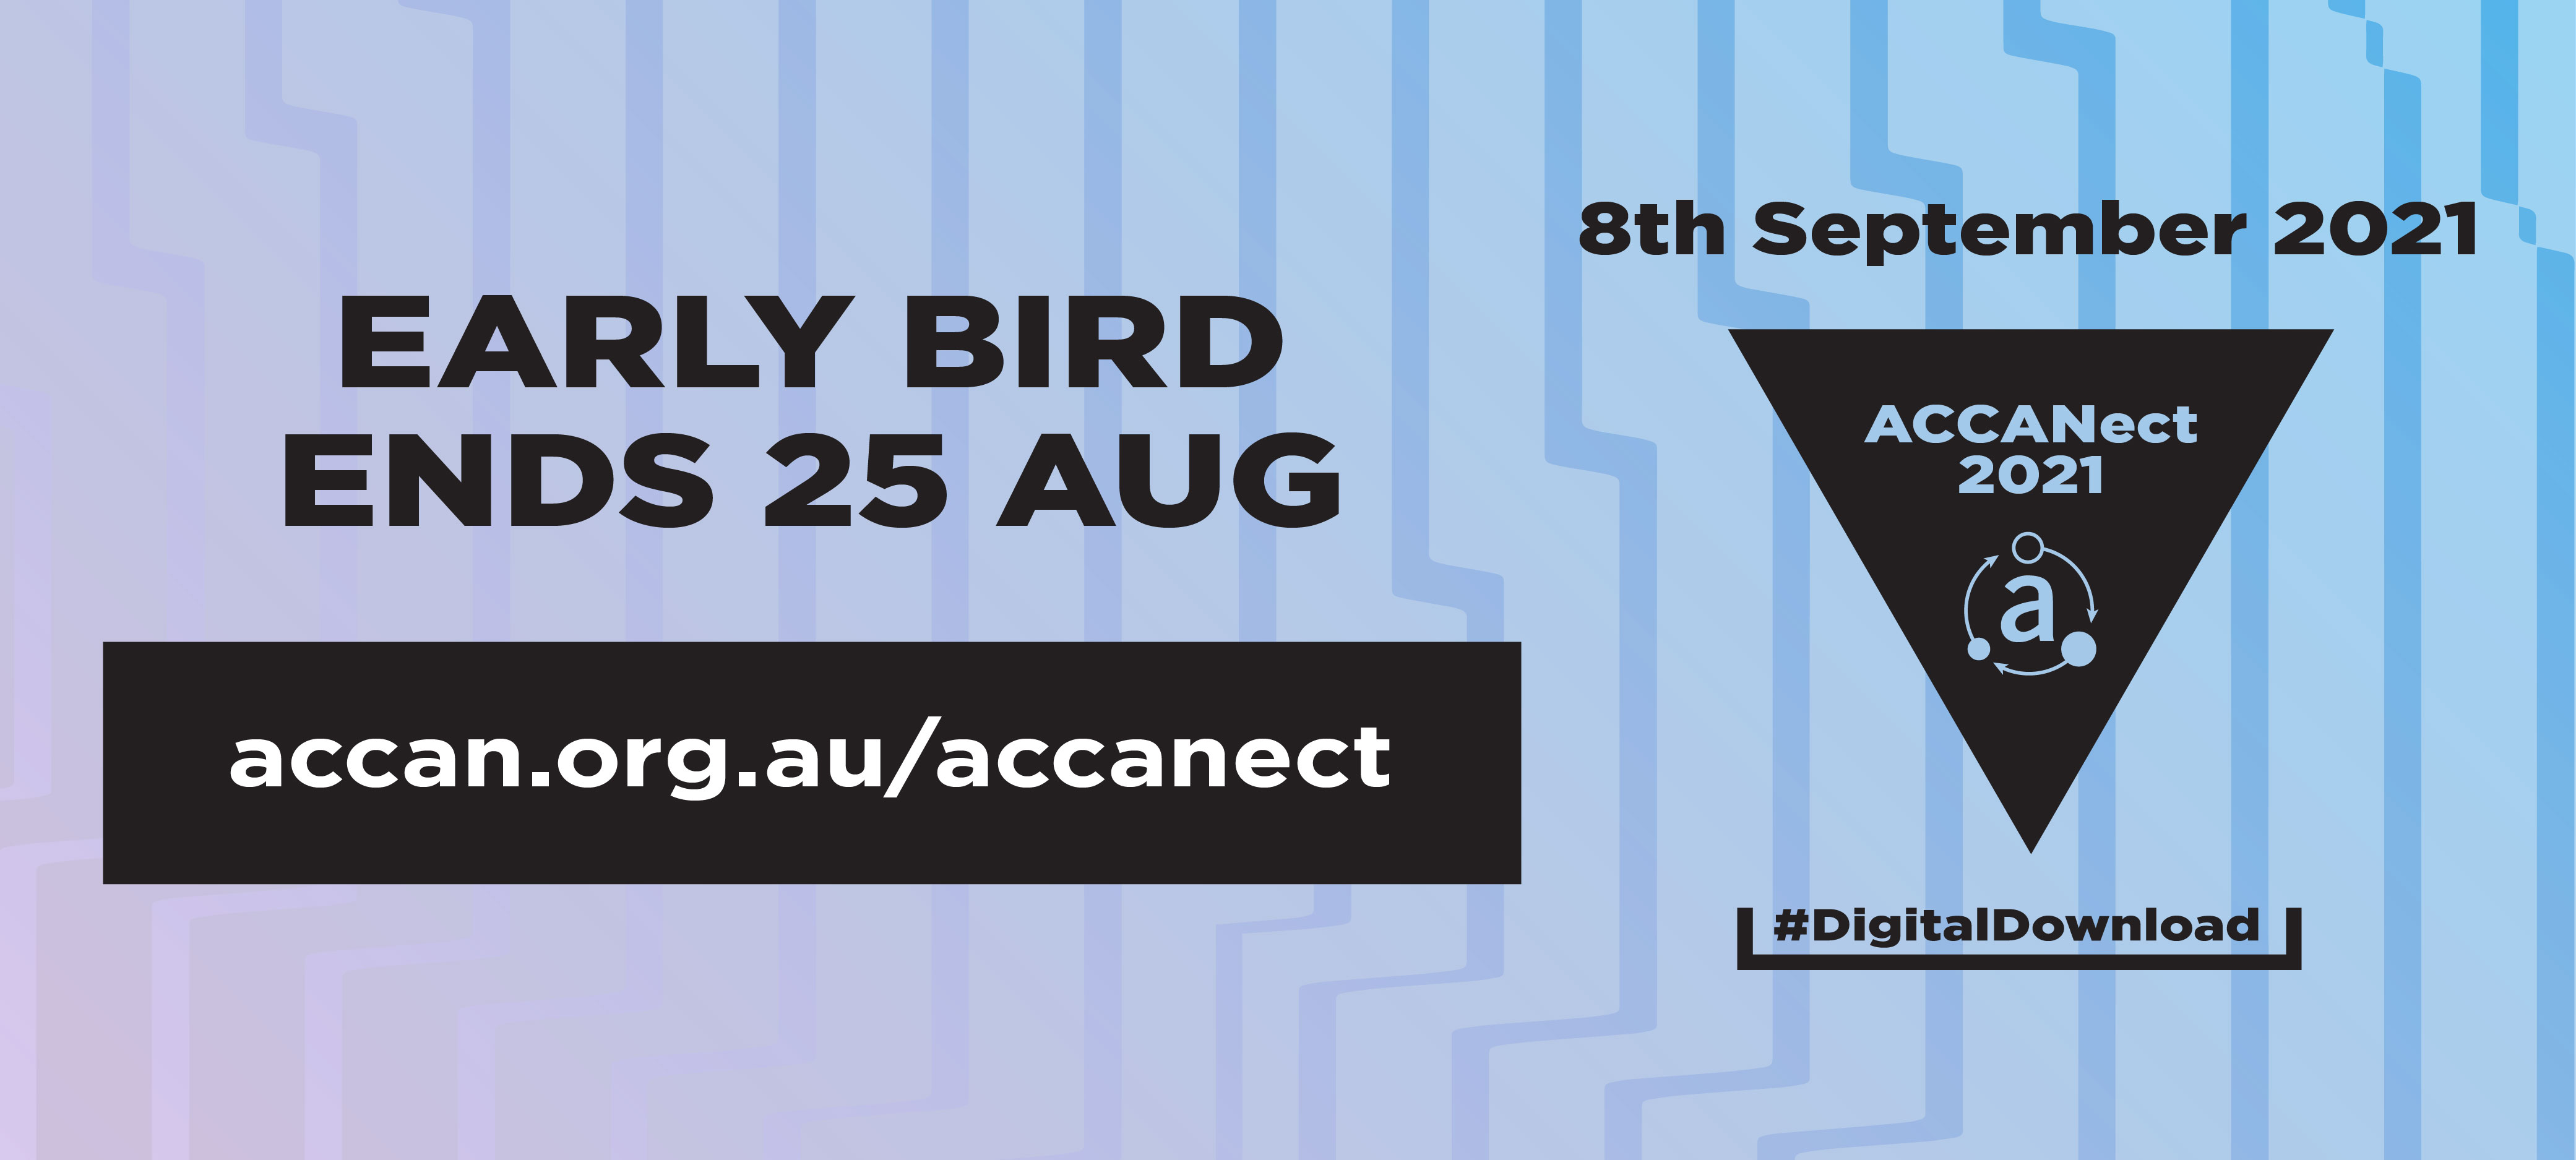 Early bird pricing fore ACCANect2021 ends 25th August. Register now at accan.org.au/accanect